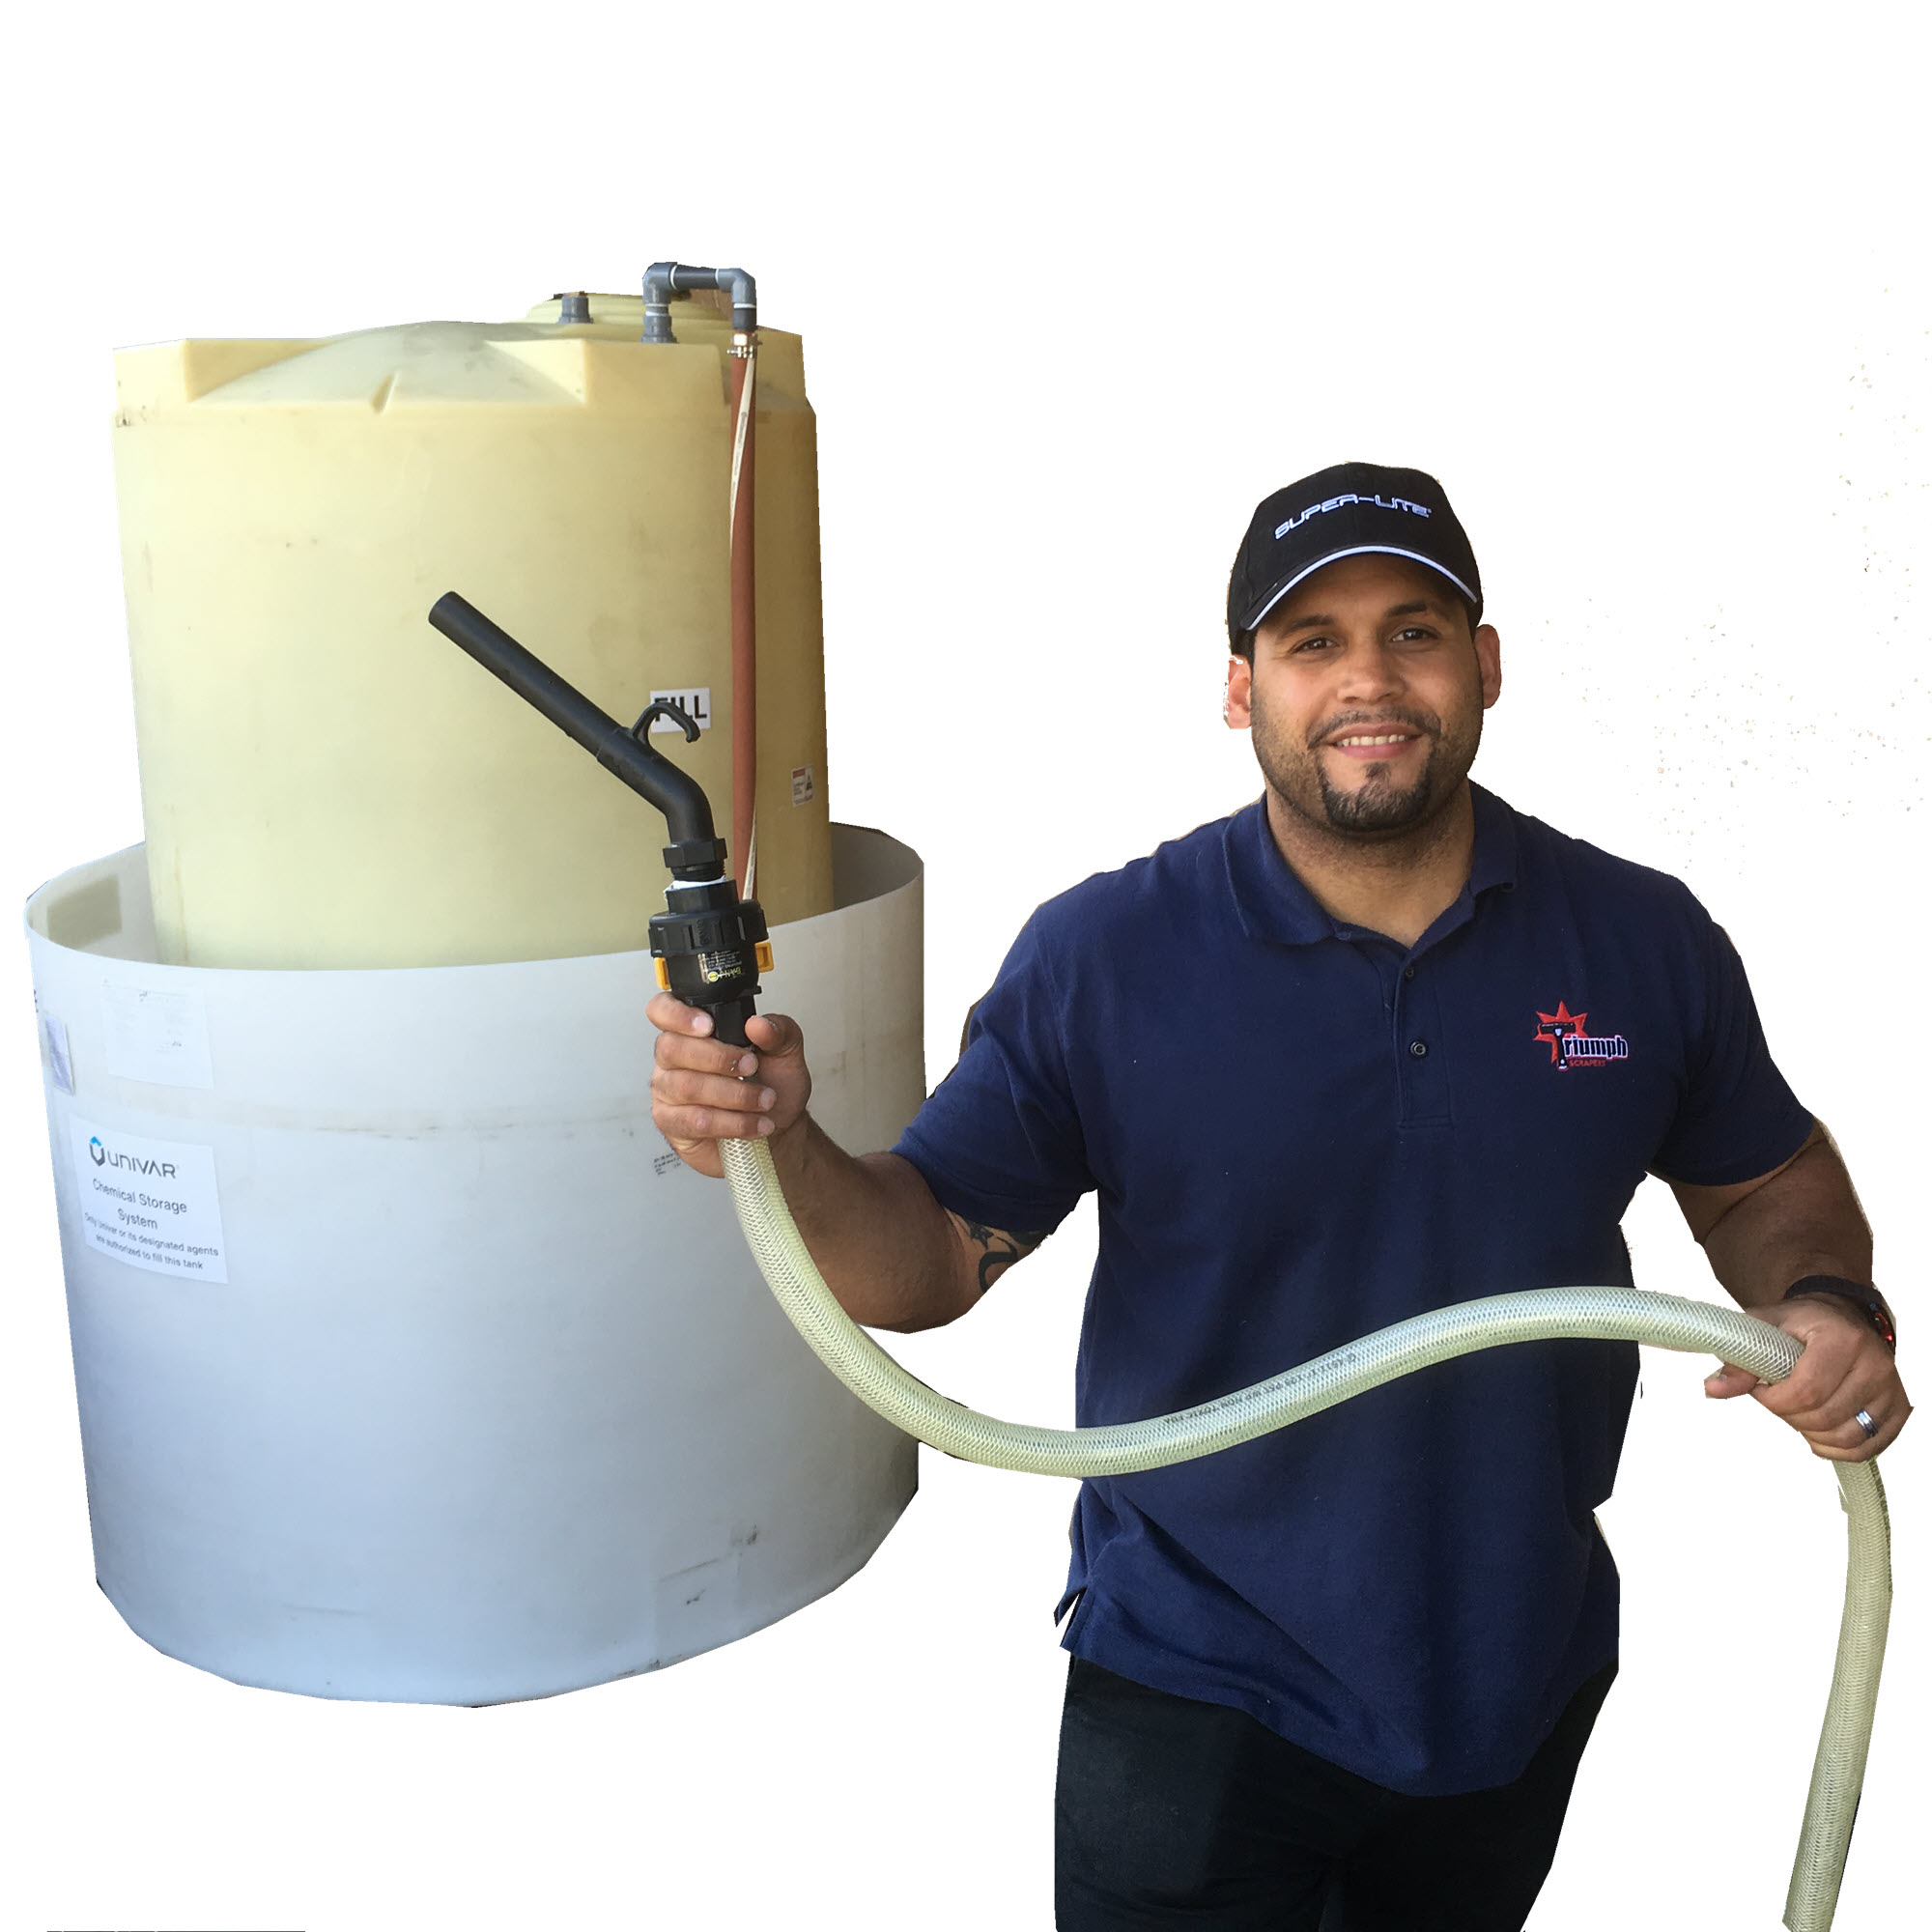 Is the SH pumped directly into our tanks or do you have it stored in 55 gal drums, totes, etc?